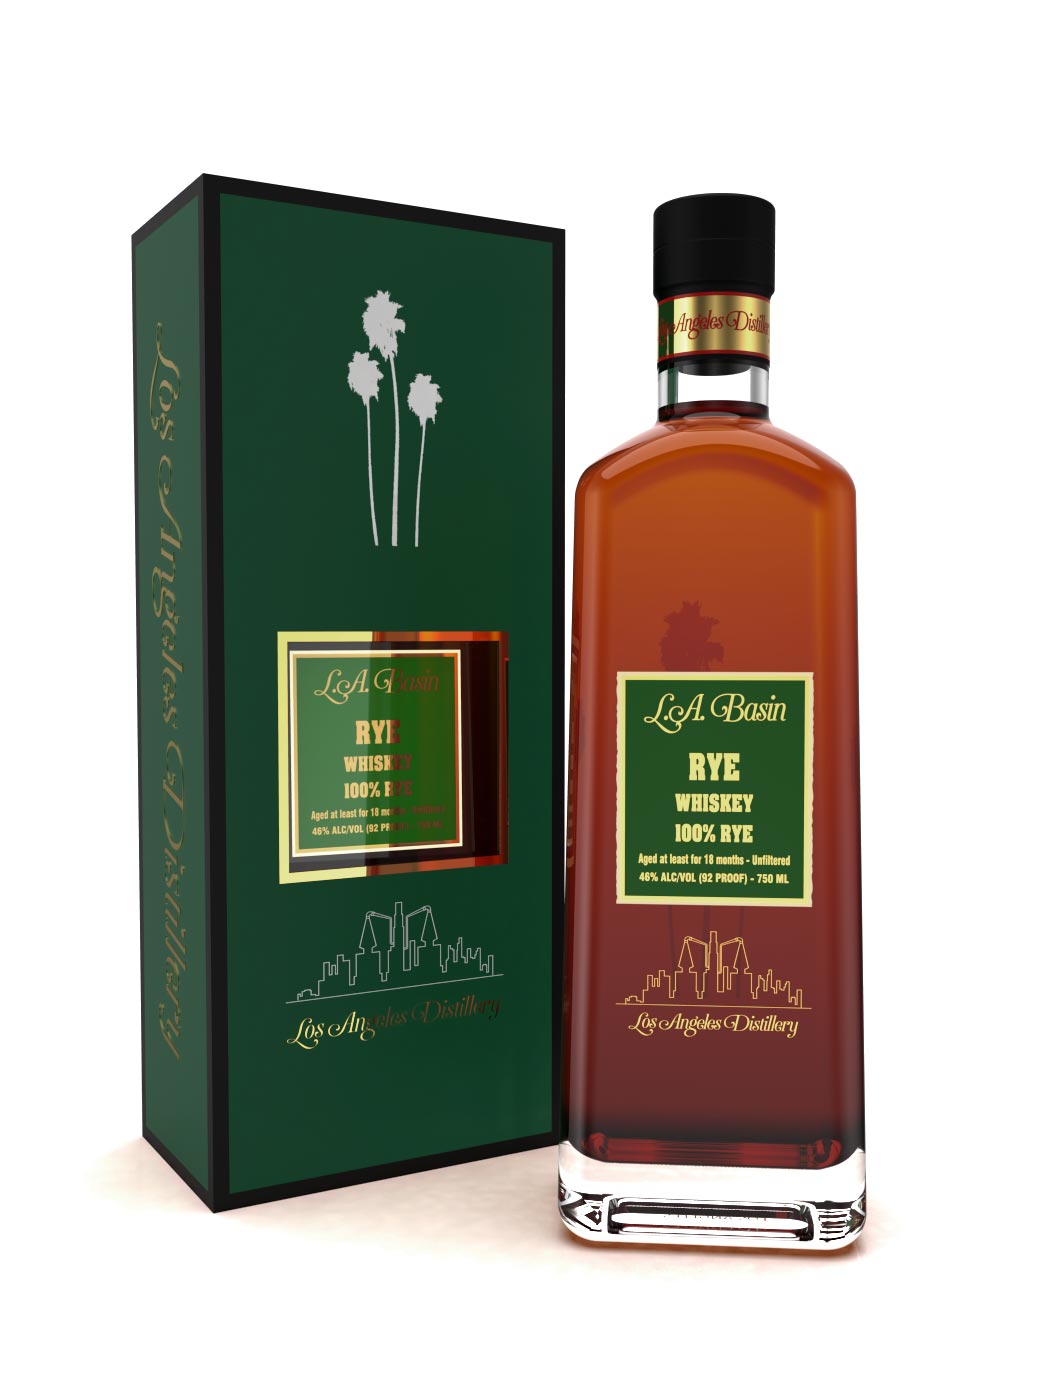 LA Basin 18 Month 92 Proof 100 Percent Rye Whiskey in a Gift Box